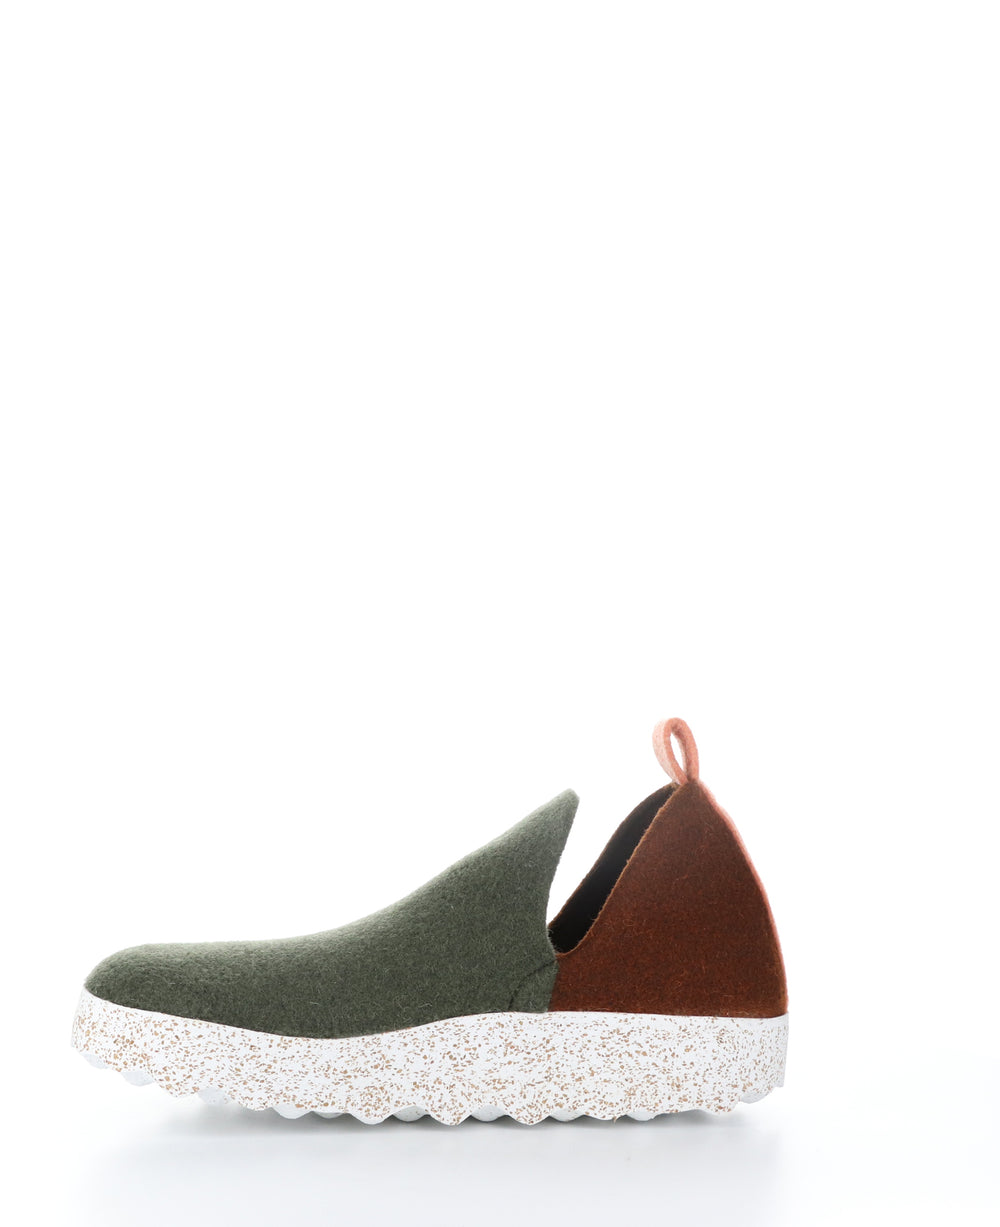 CITY089ASPM Mgreen/Brn/Tang Round Toe Shoes|CITY089ASPM Chaussures à Bout Rond in Vert